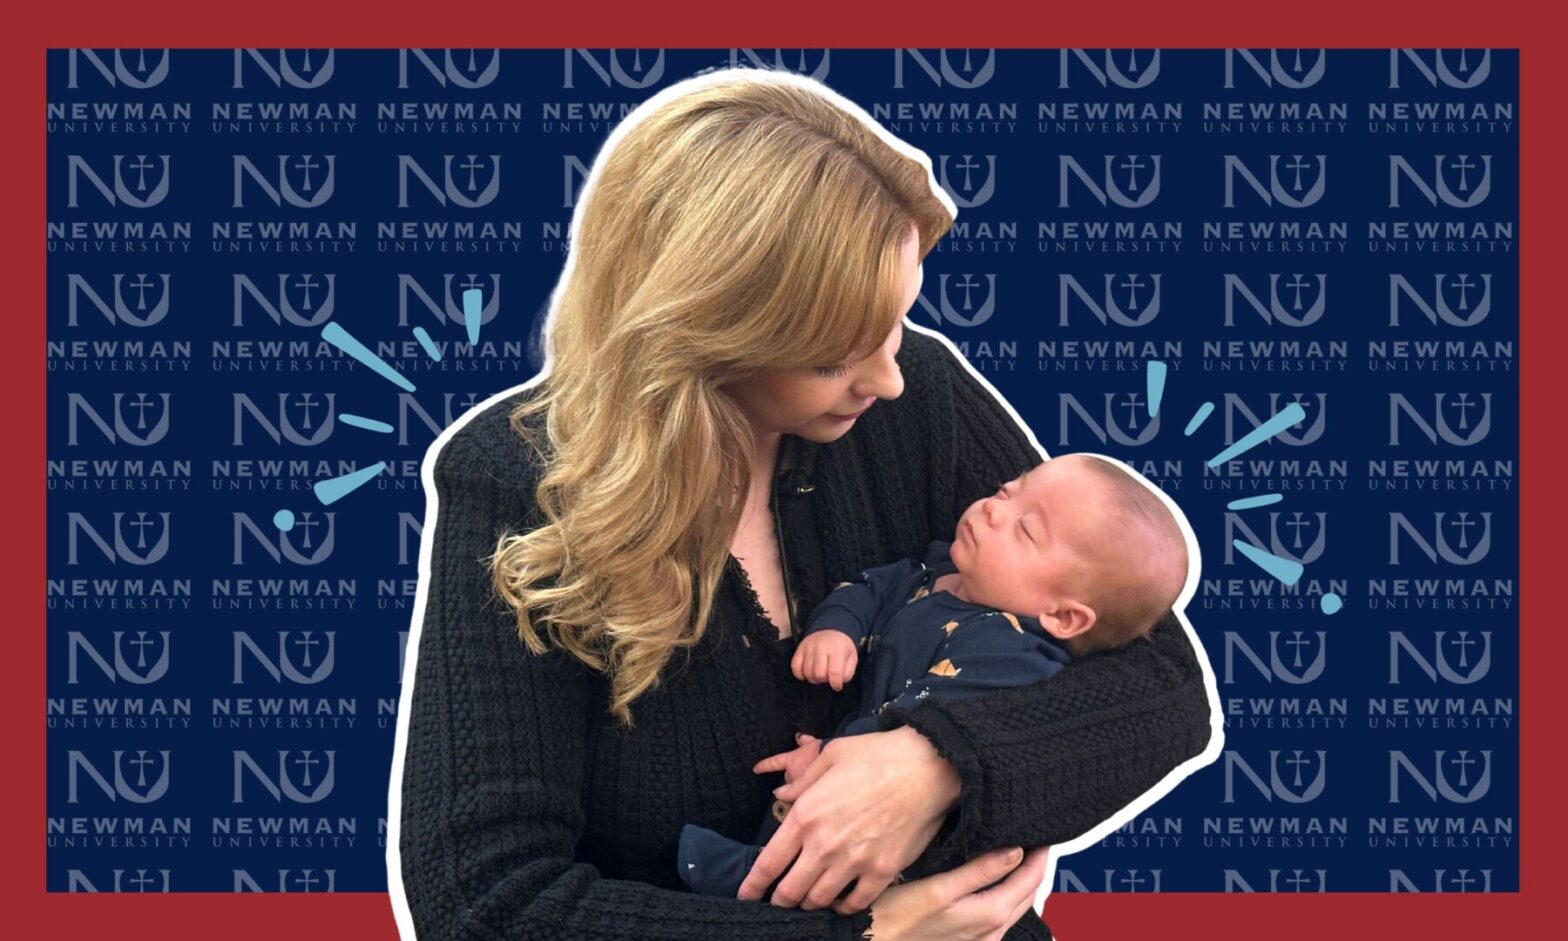 Crystal Khan holds baby Noah with Newman Univeristy logos in the background.